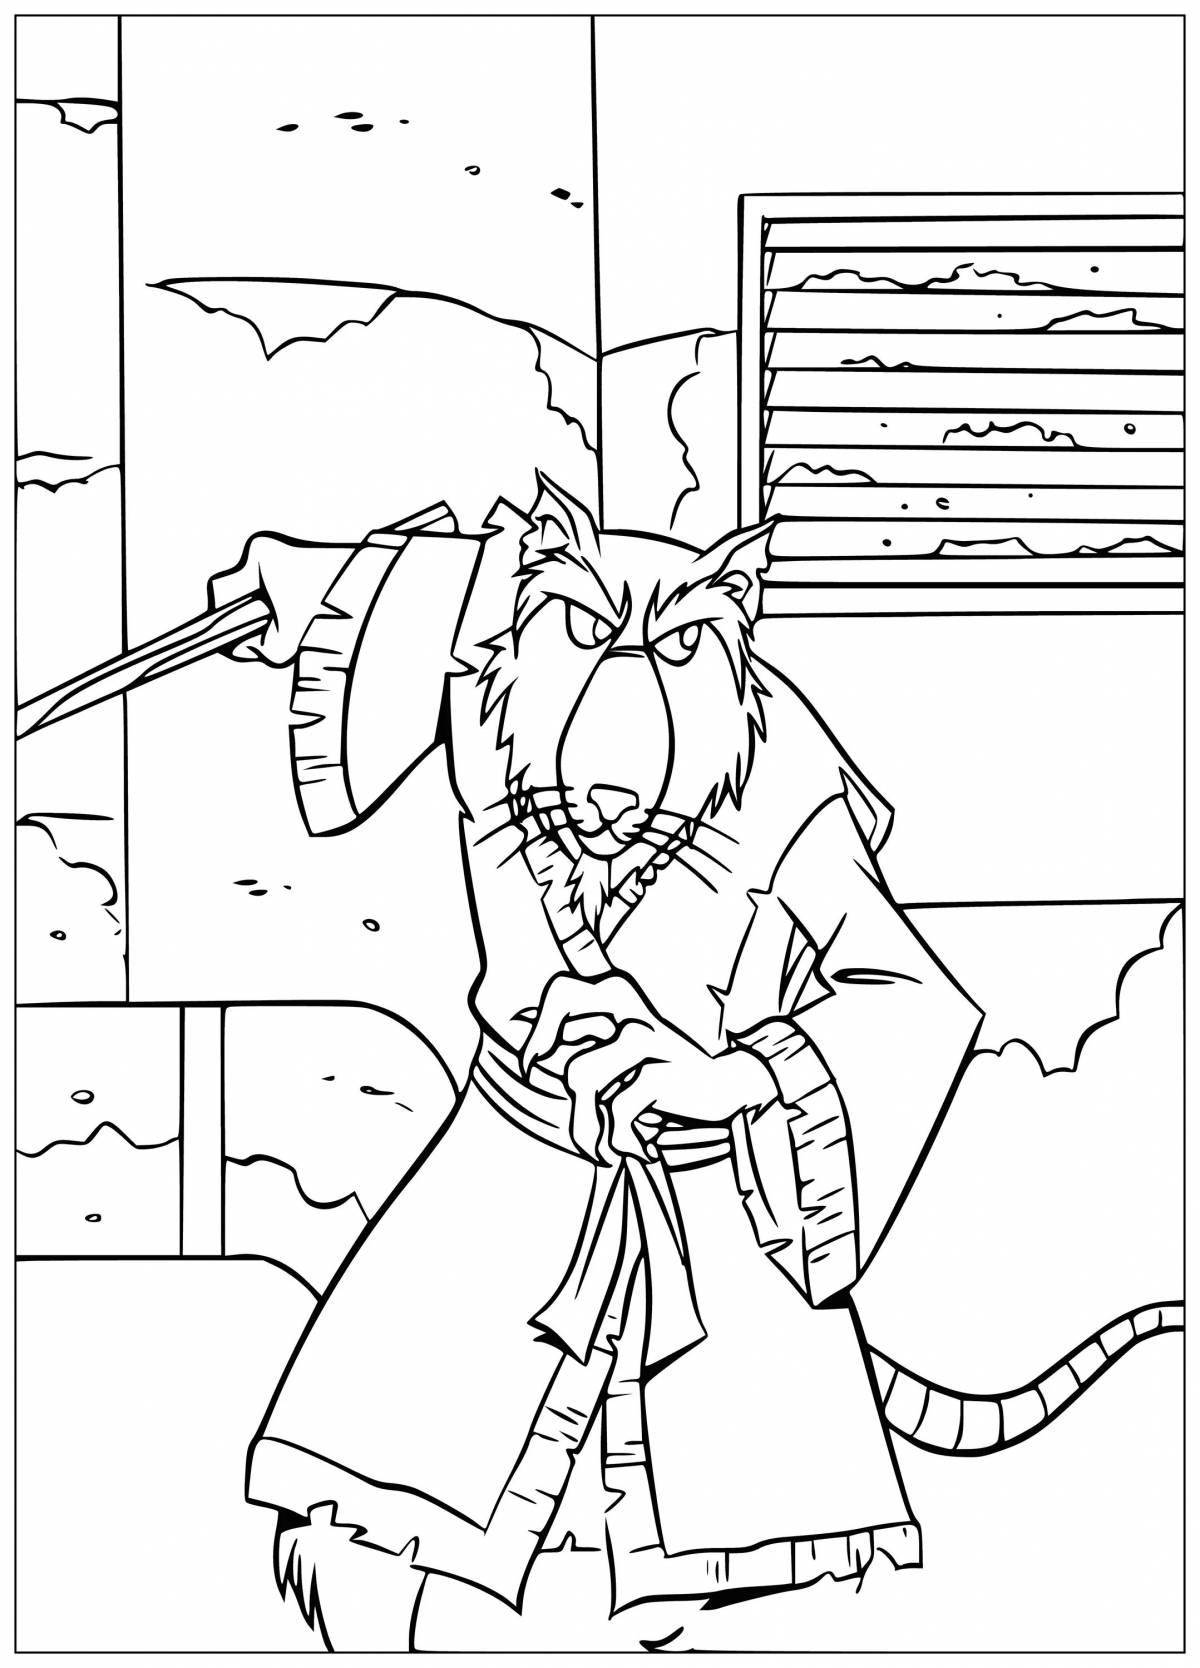 Exotic nightingale and robber coloring page